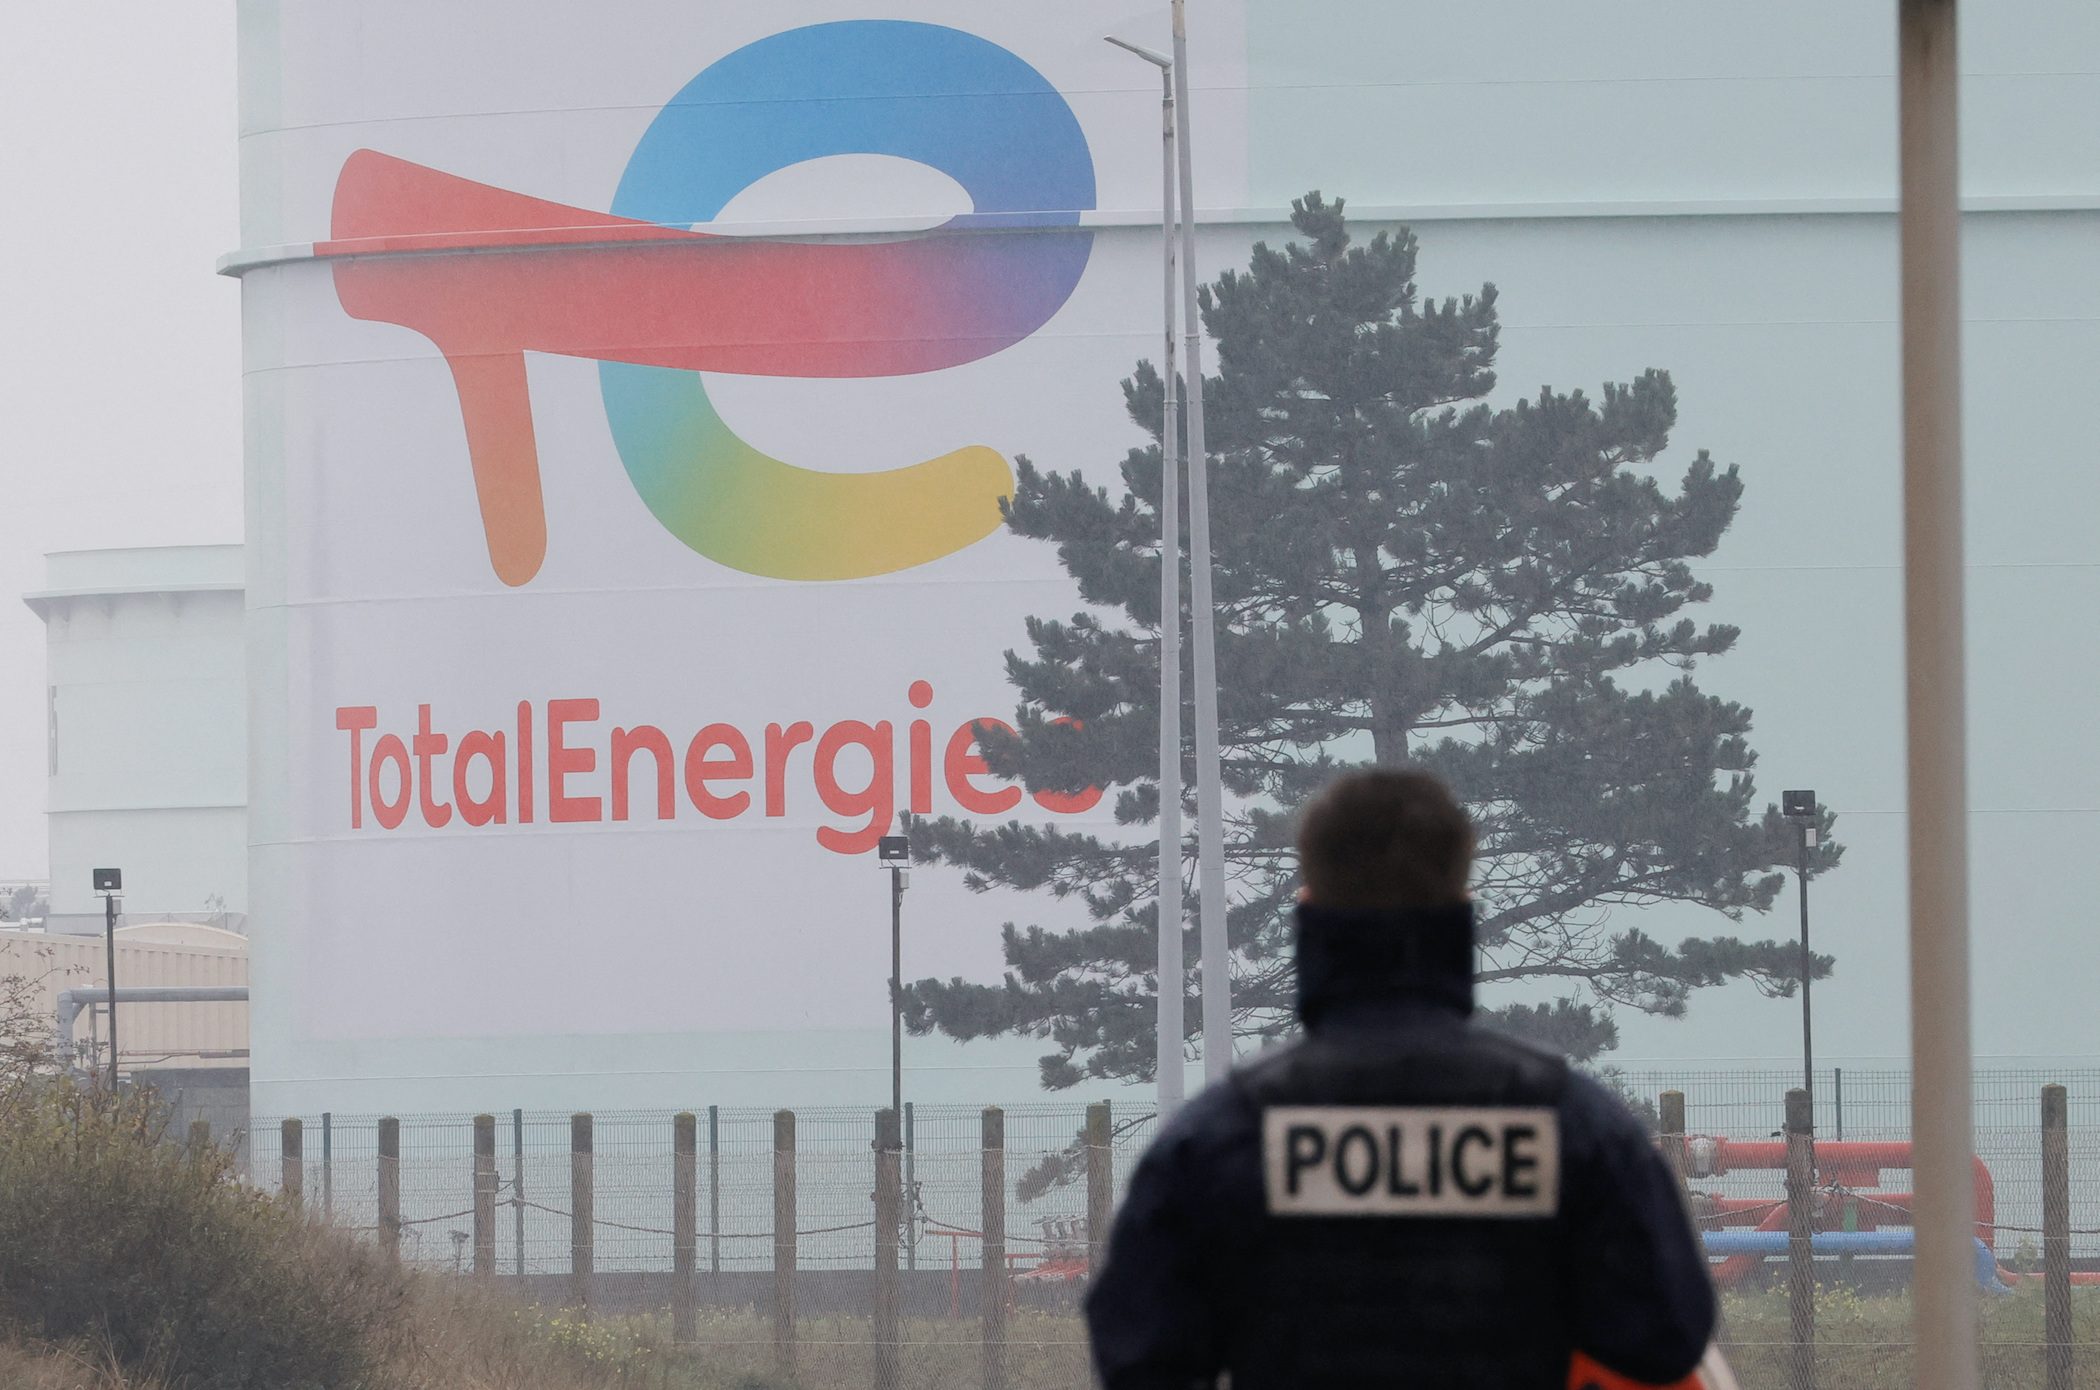 CGT union shuns TotalEnergies talks as French fuel crisis drags on